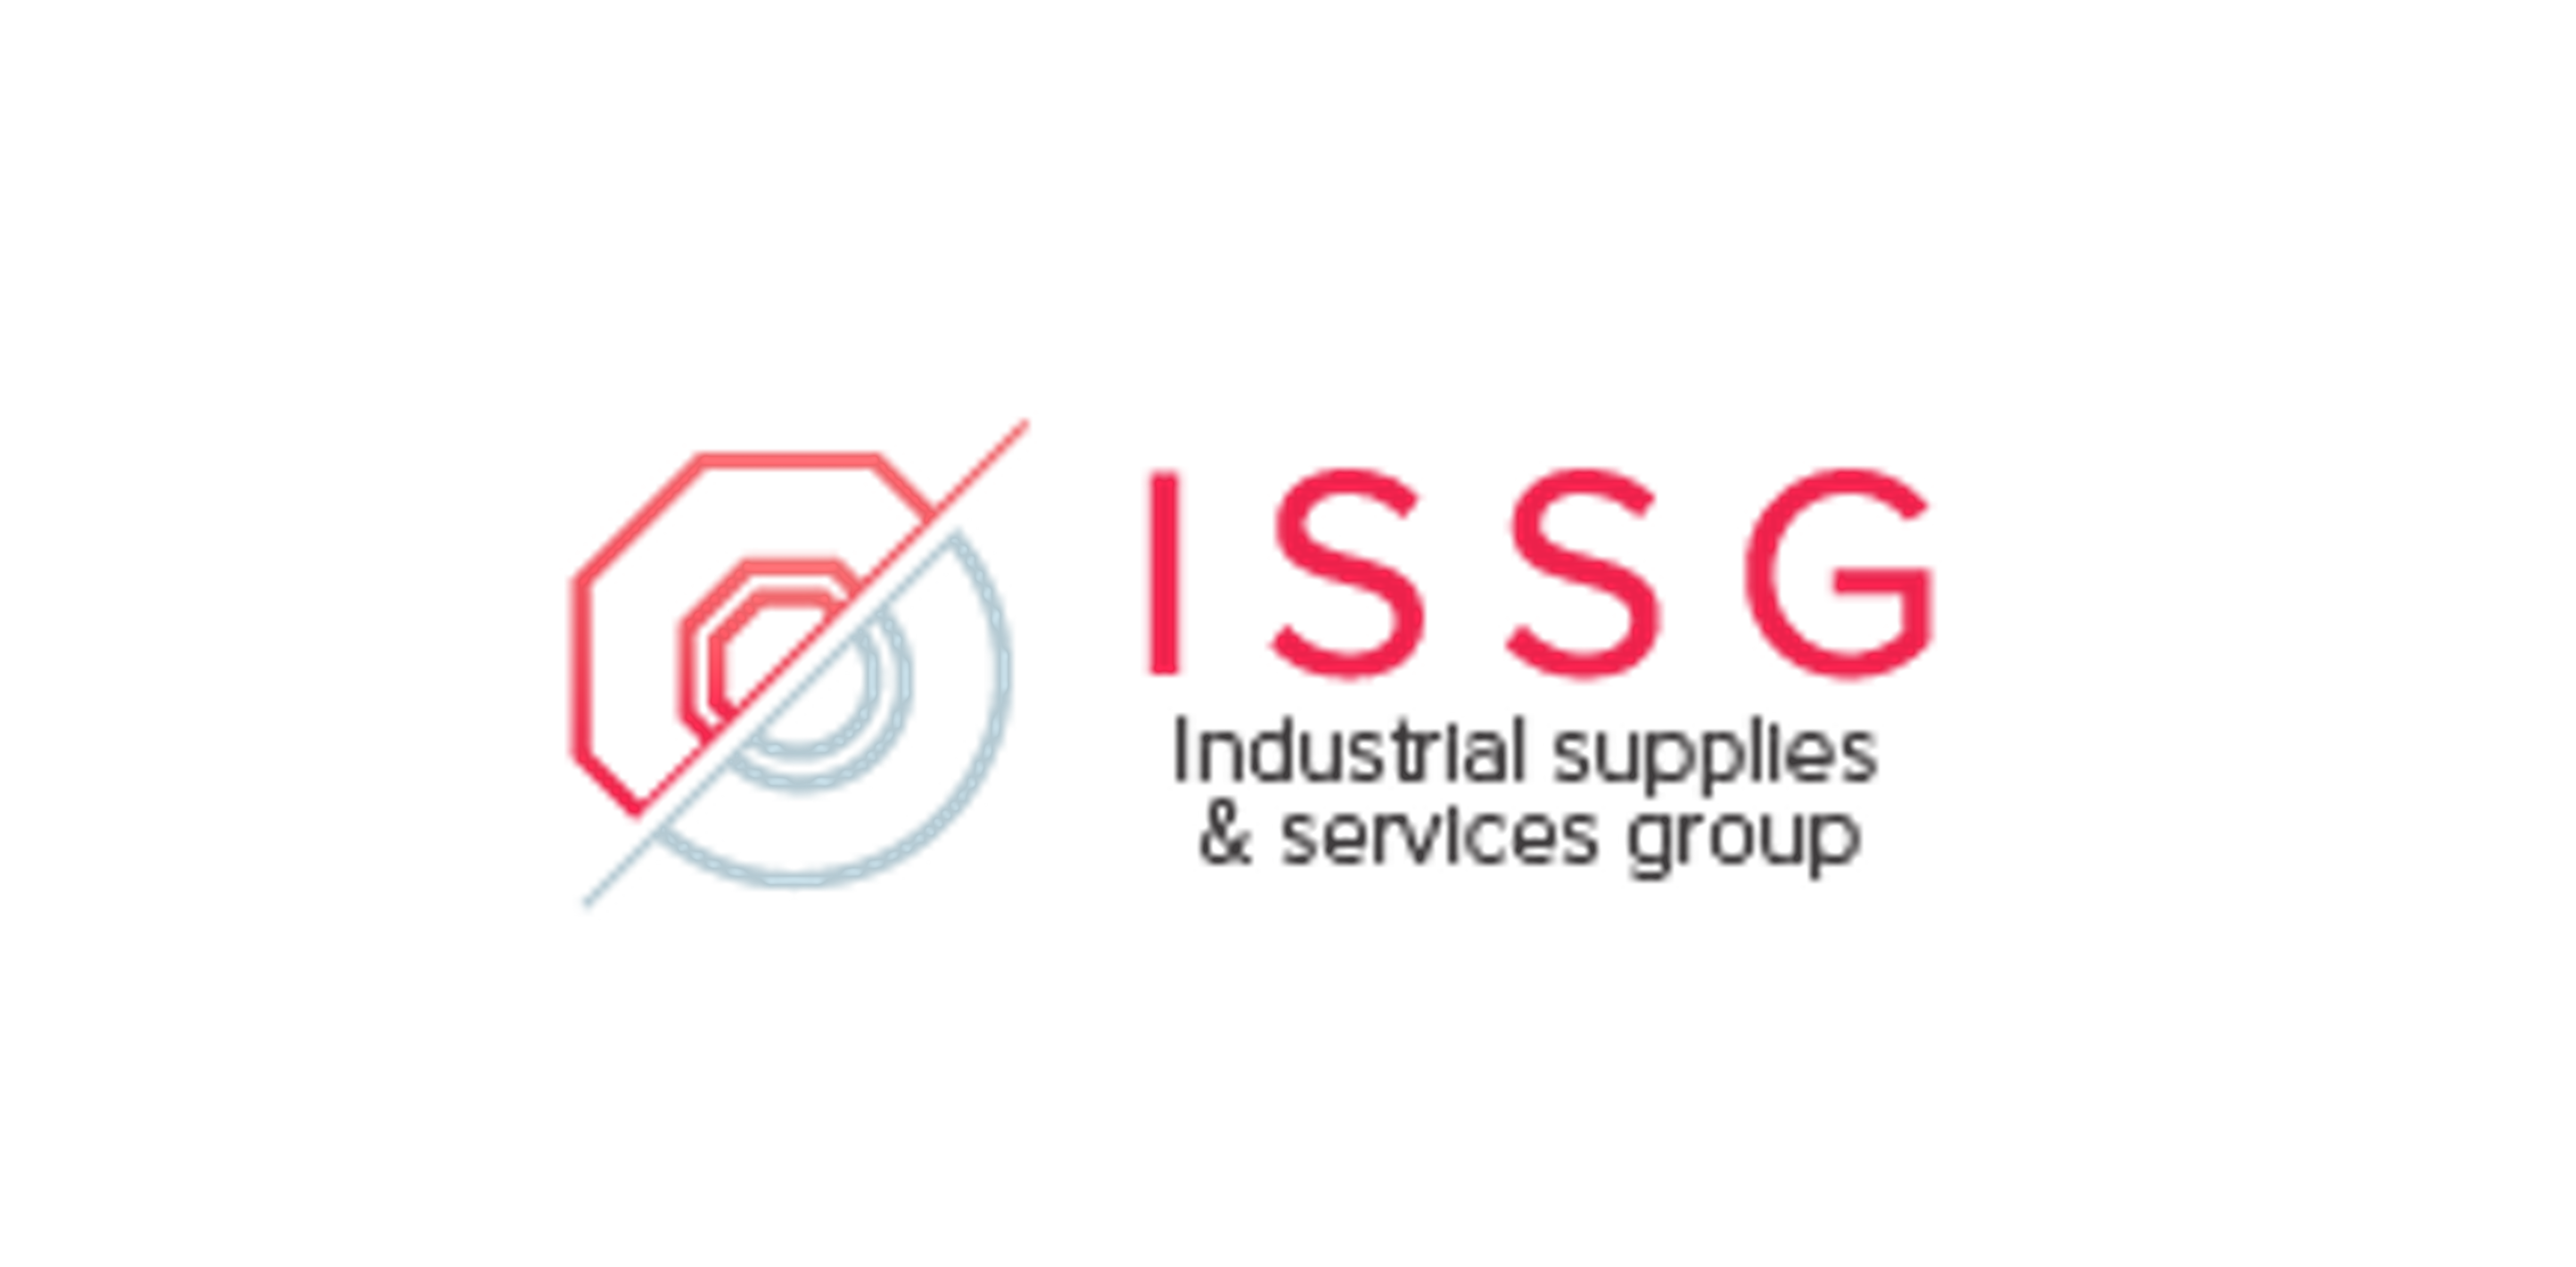 ISSG - Industrial Supplies & Services Group